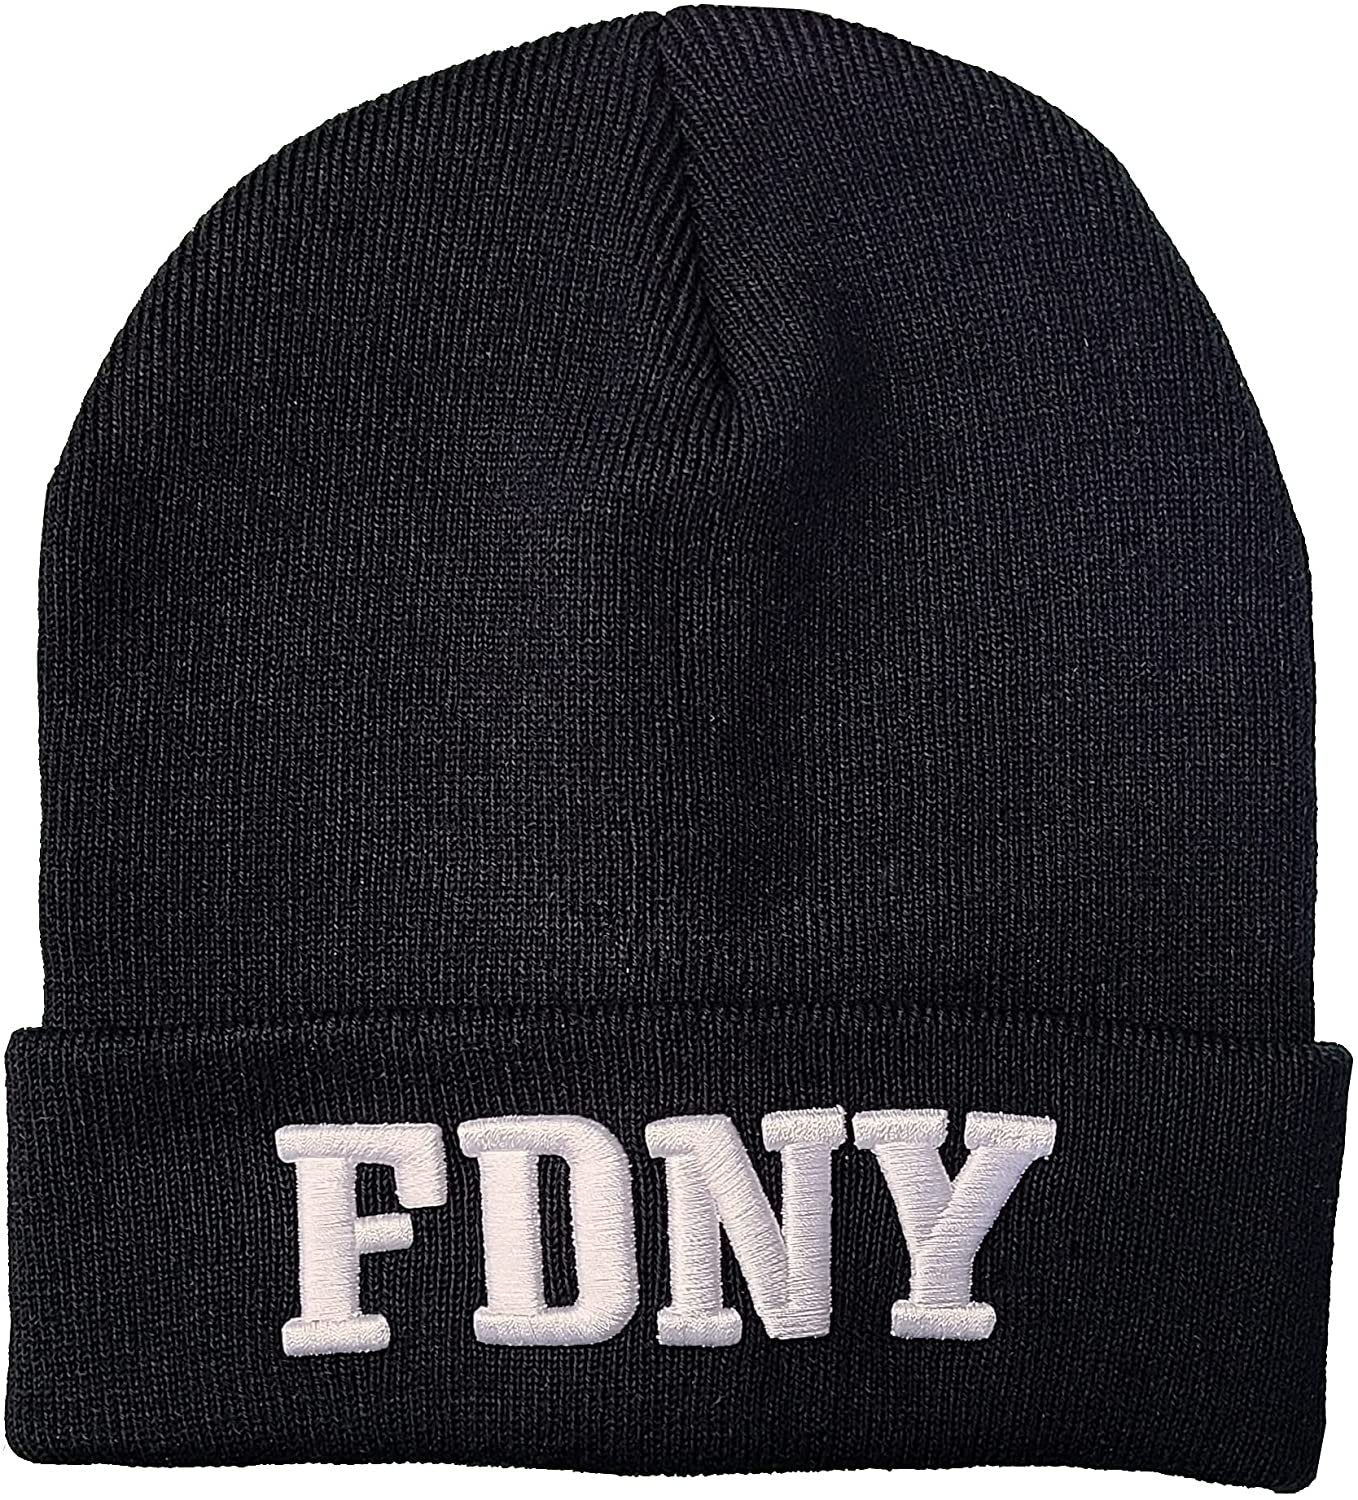 FDNY NYPD Beanies Officially Licensed Cold Weather Winter Hats